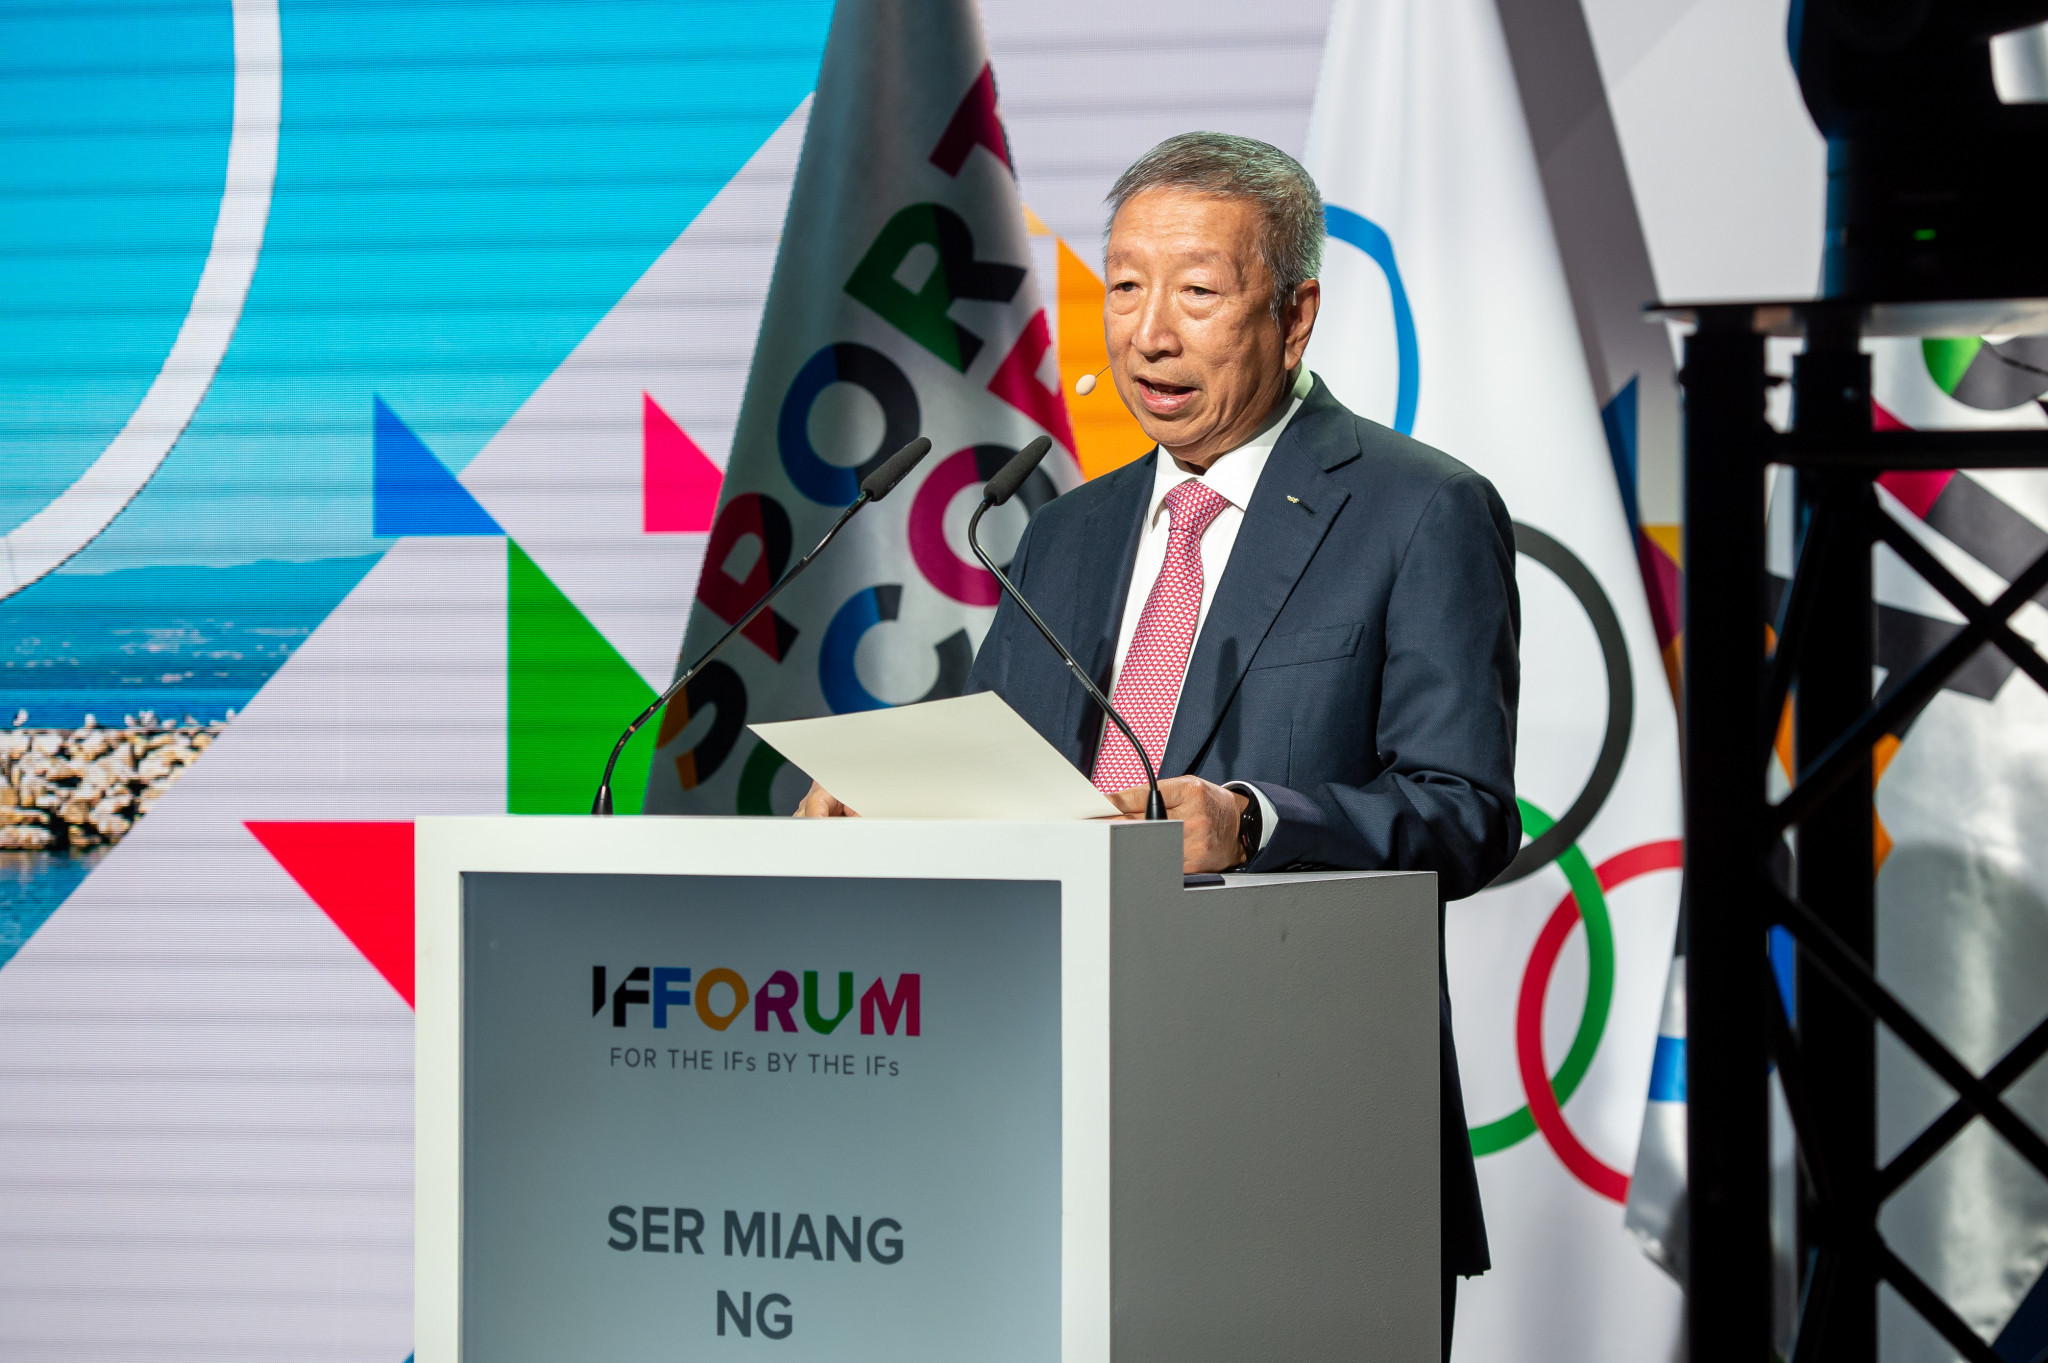 IOC vice-president Ng Ser Miang spoke on Bach's behalf at the IF Forum ©SportAccord